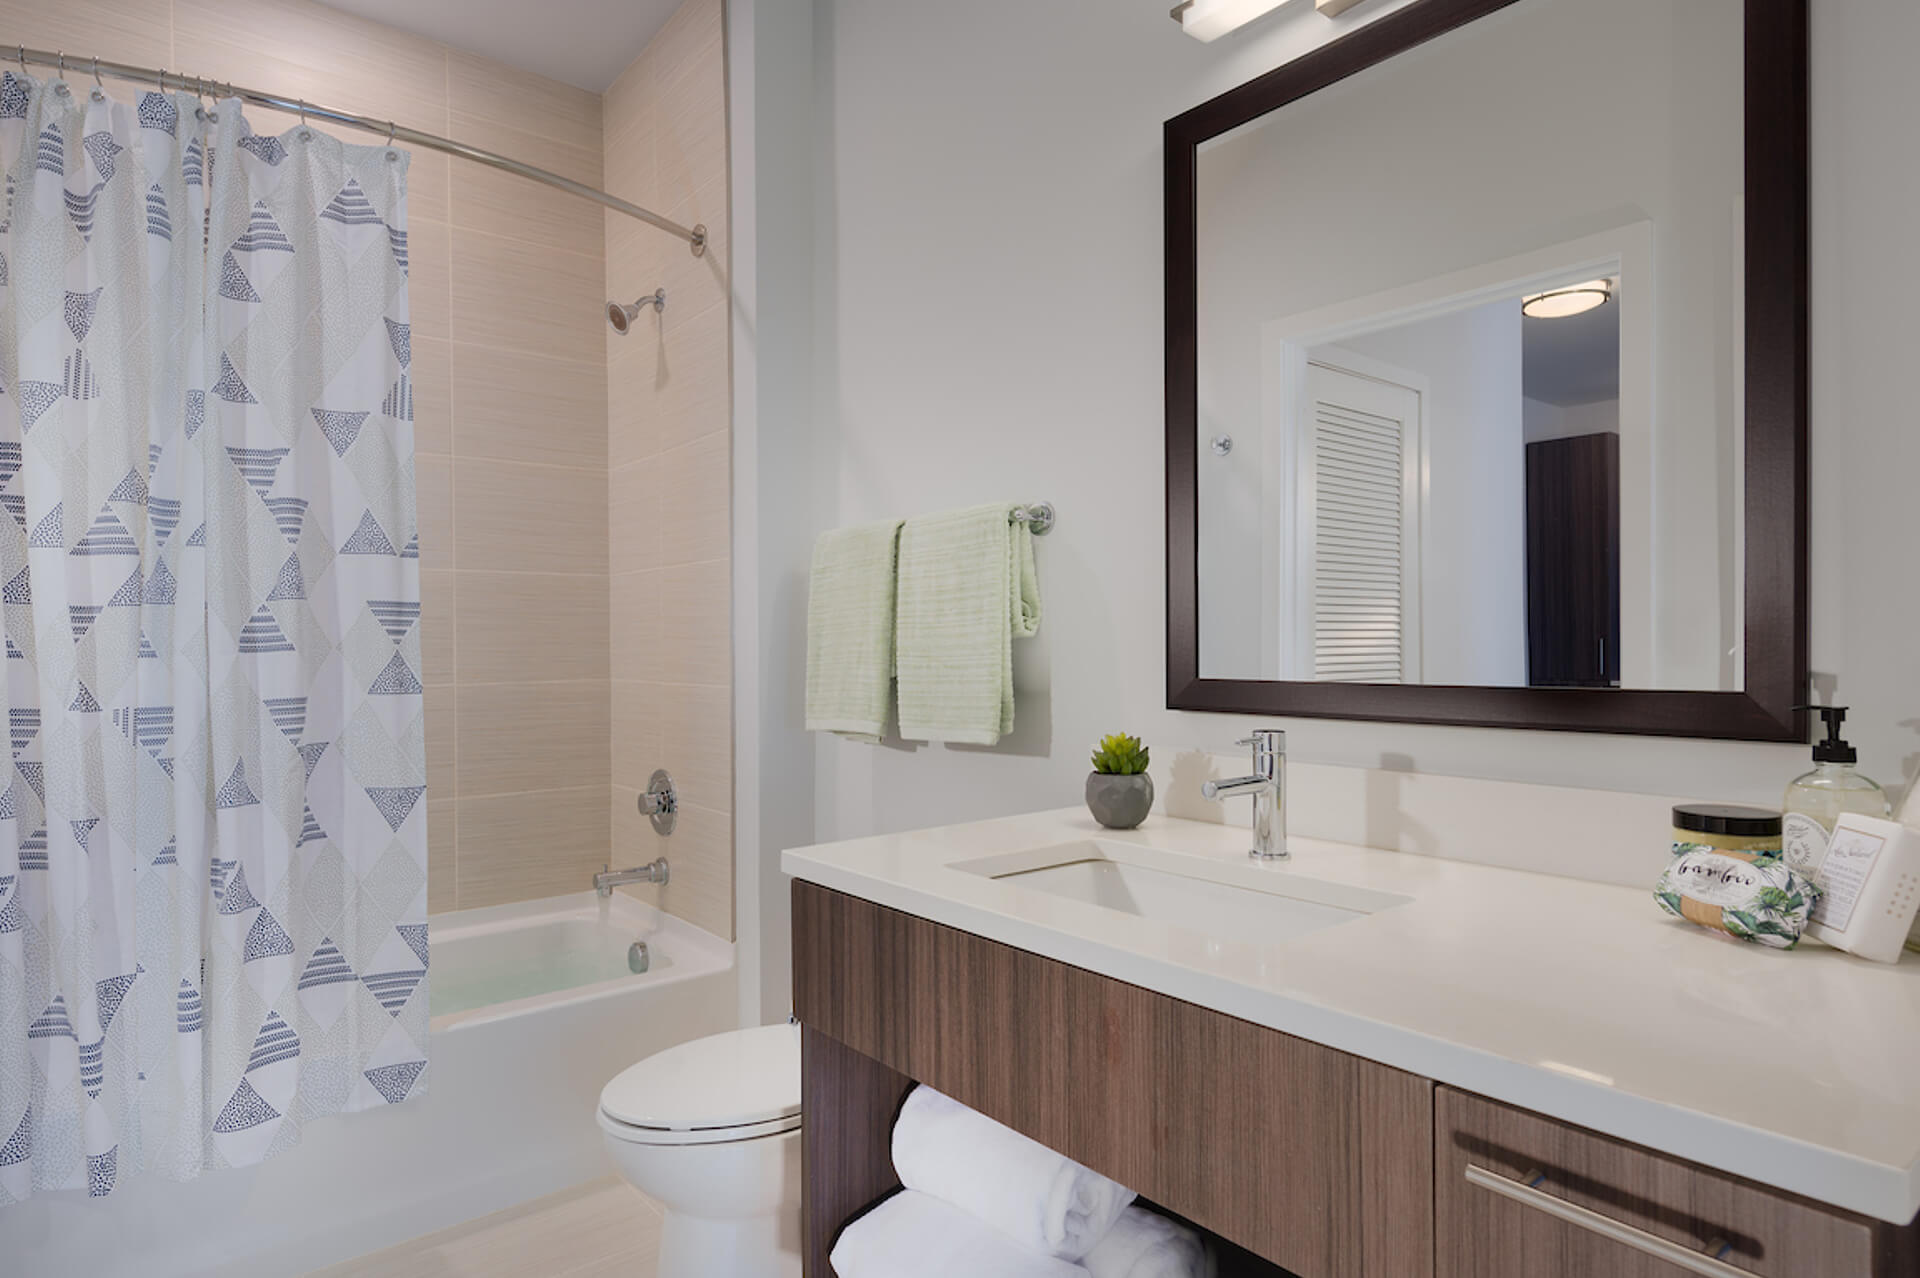 Modern finishes in a contemporary bathroom design